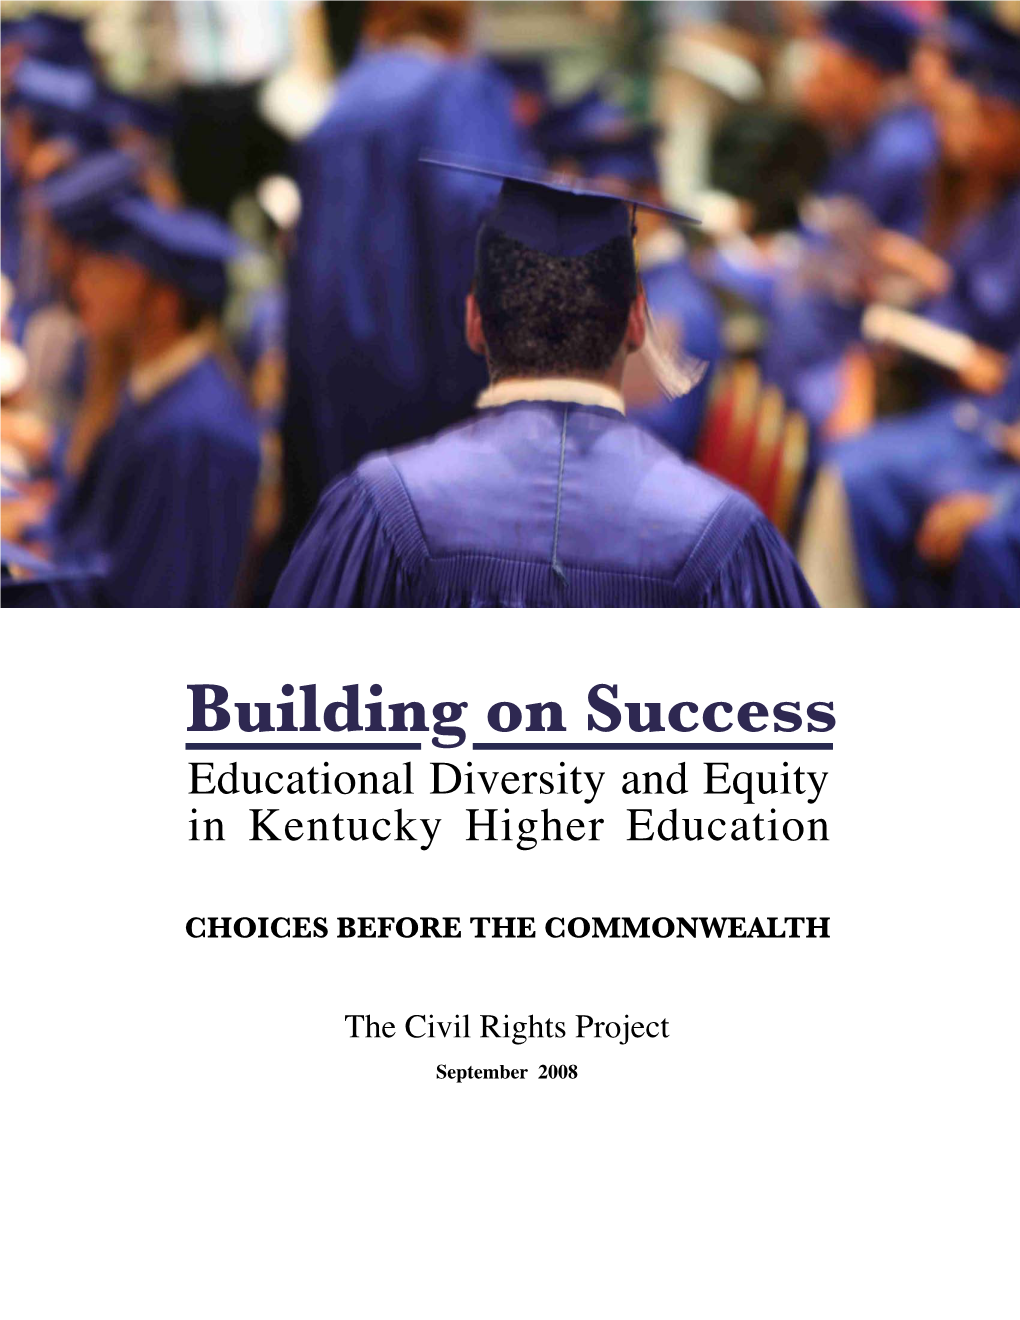 Building on Success: Educational Diversity and Equity in Kentucky